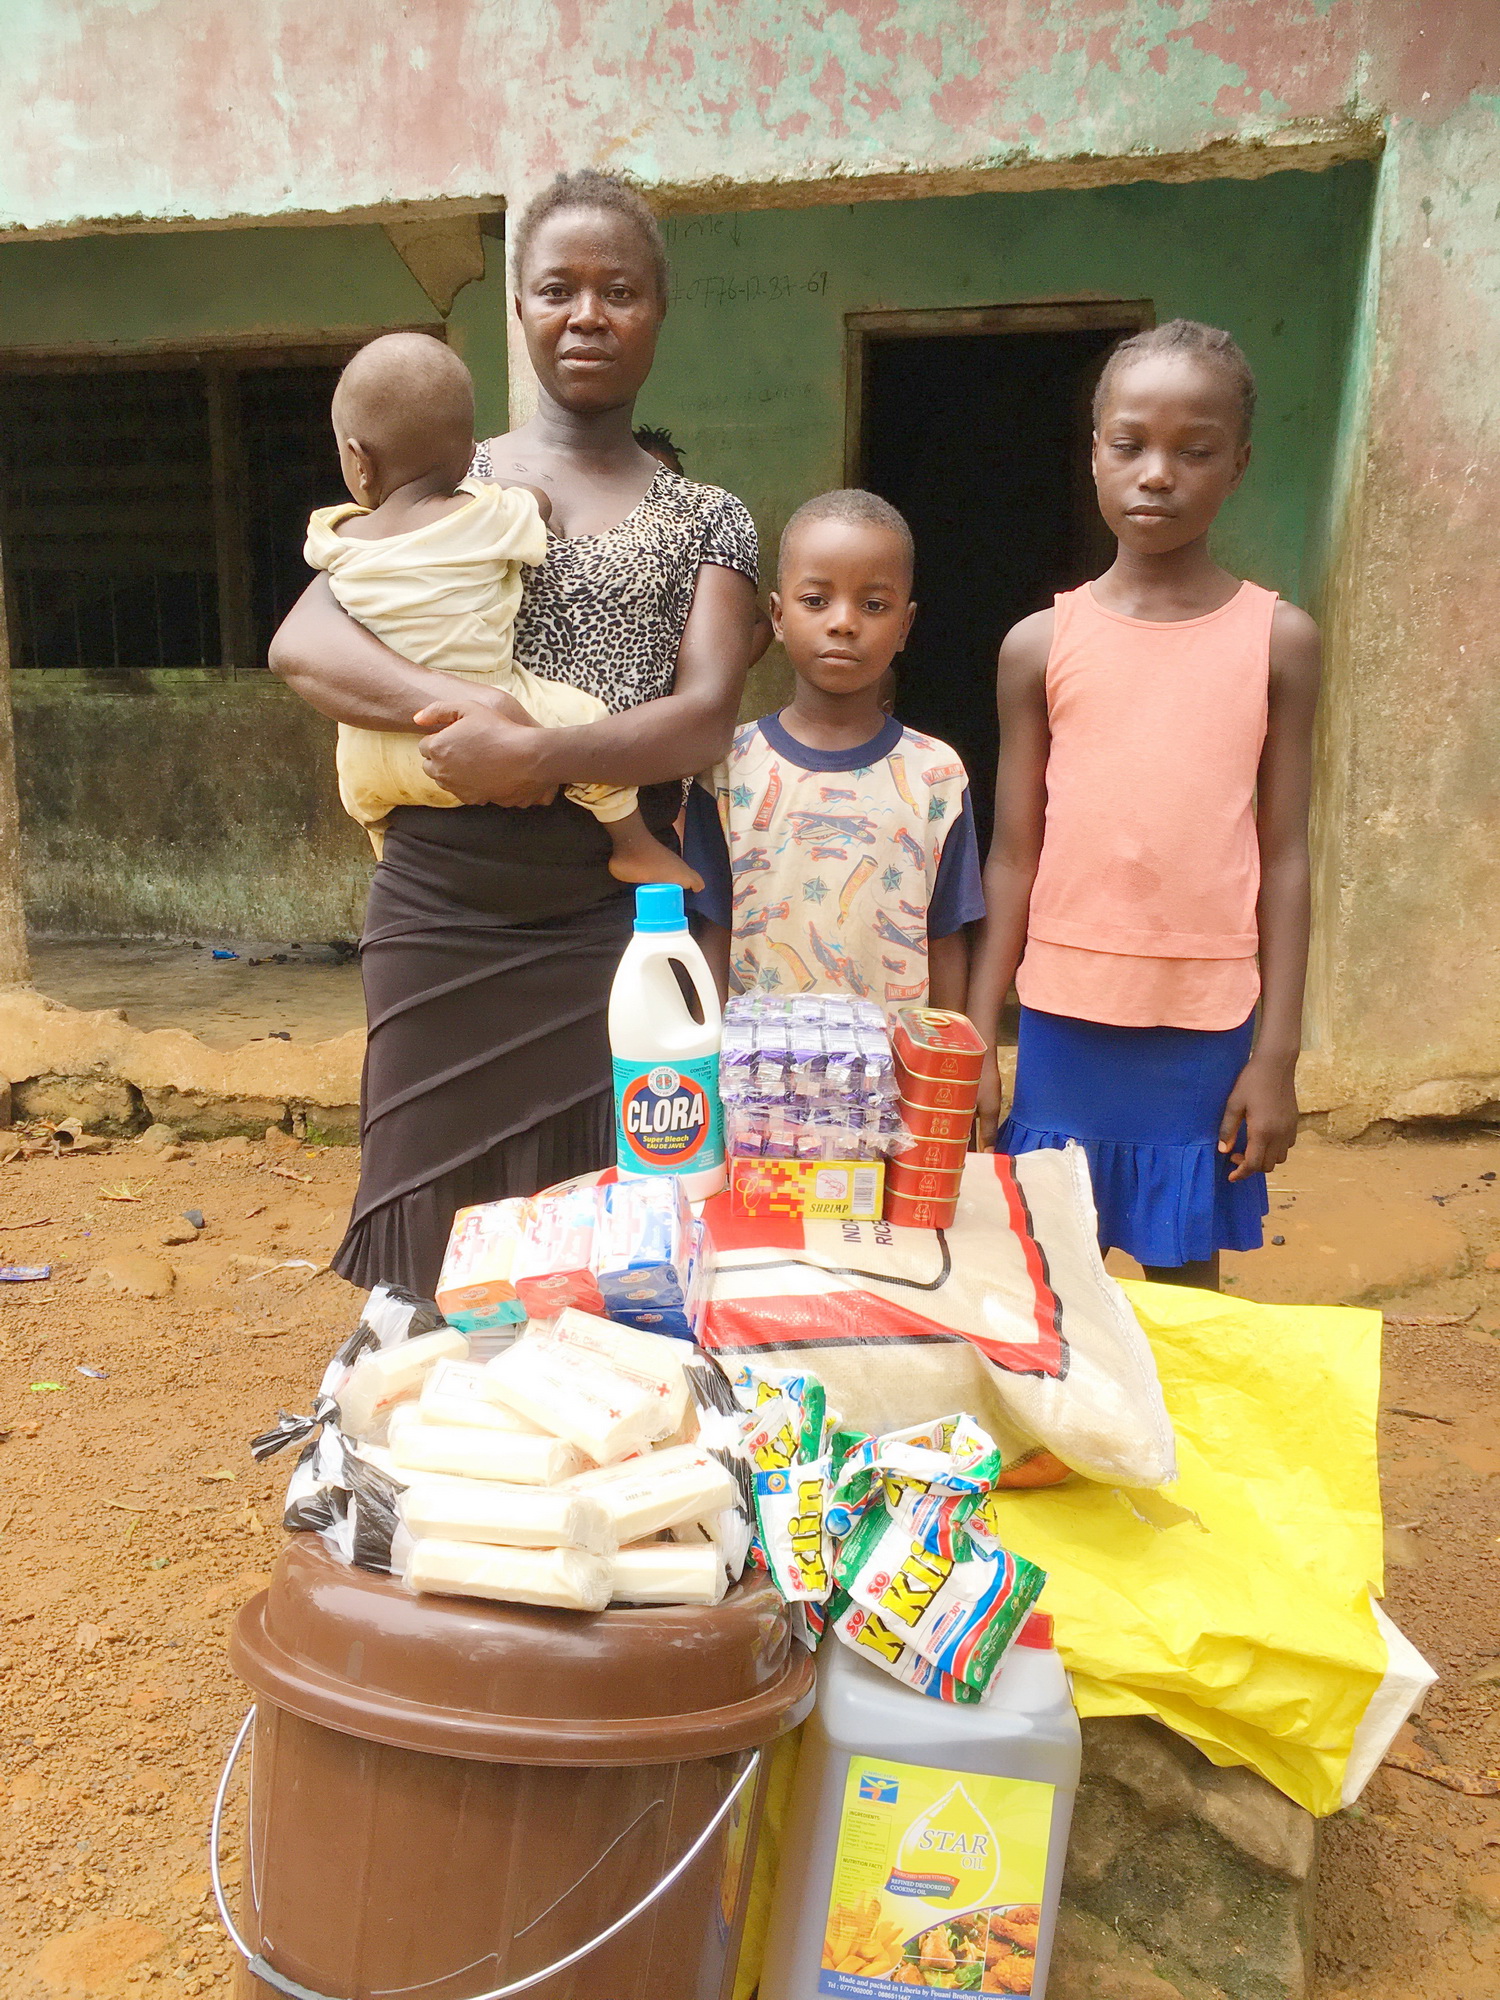 Hannah Gaye is another struggling Single Mother.  Provision of Hope brought her a food package.